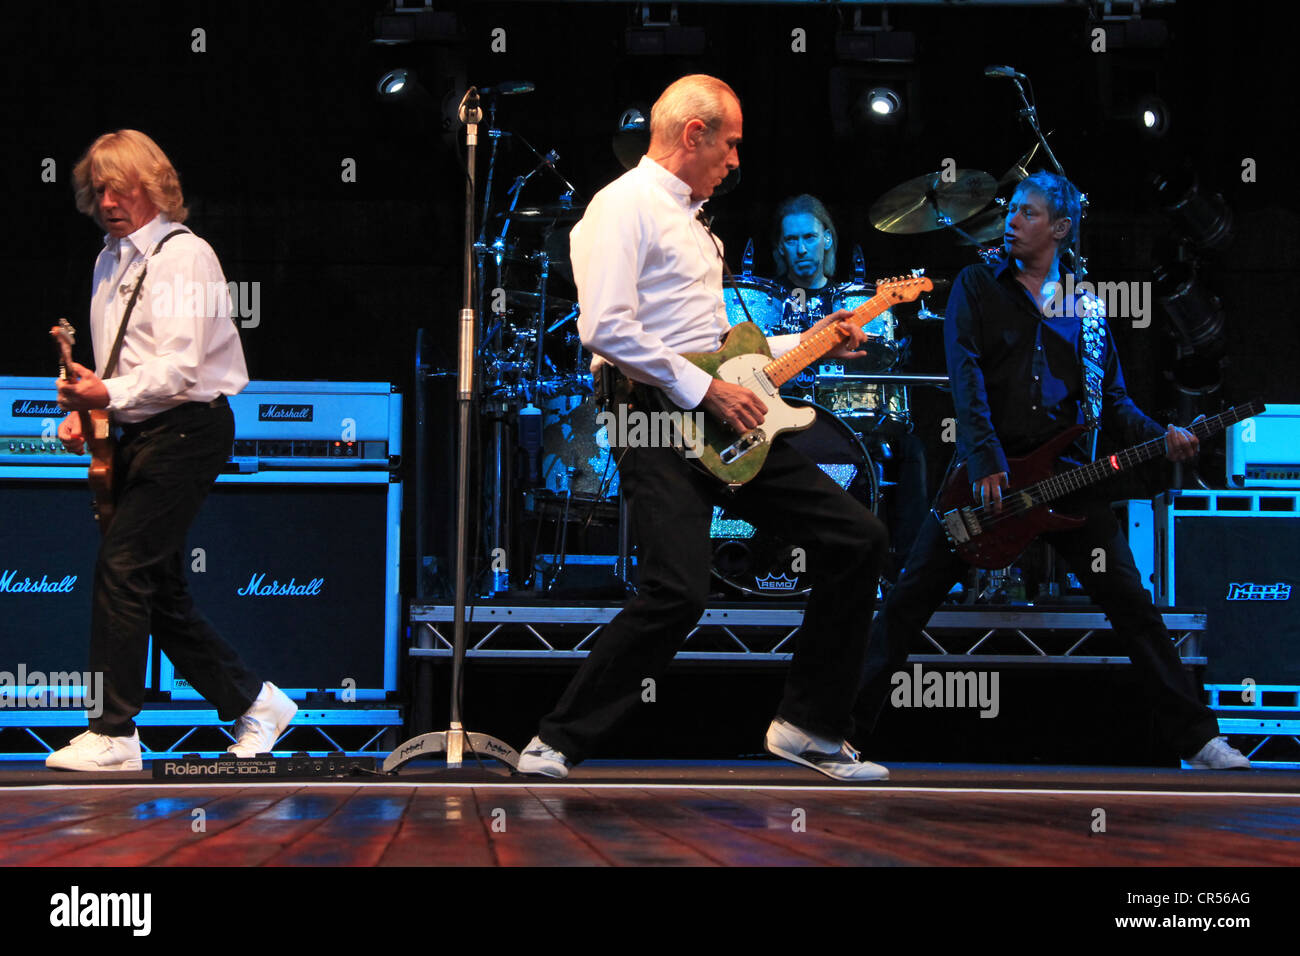 Rick Parfitt, on the left, and Francis Rossi, in the middle, performing with their band Status Quo, Freilichtbuehne Junge Garde Stock Photo